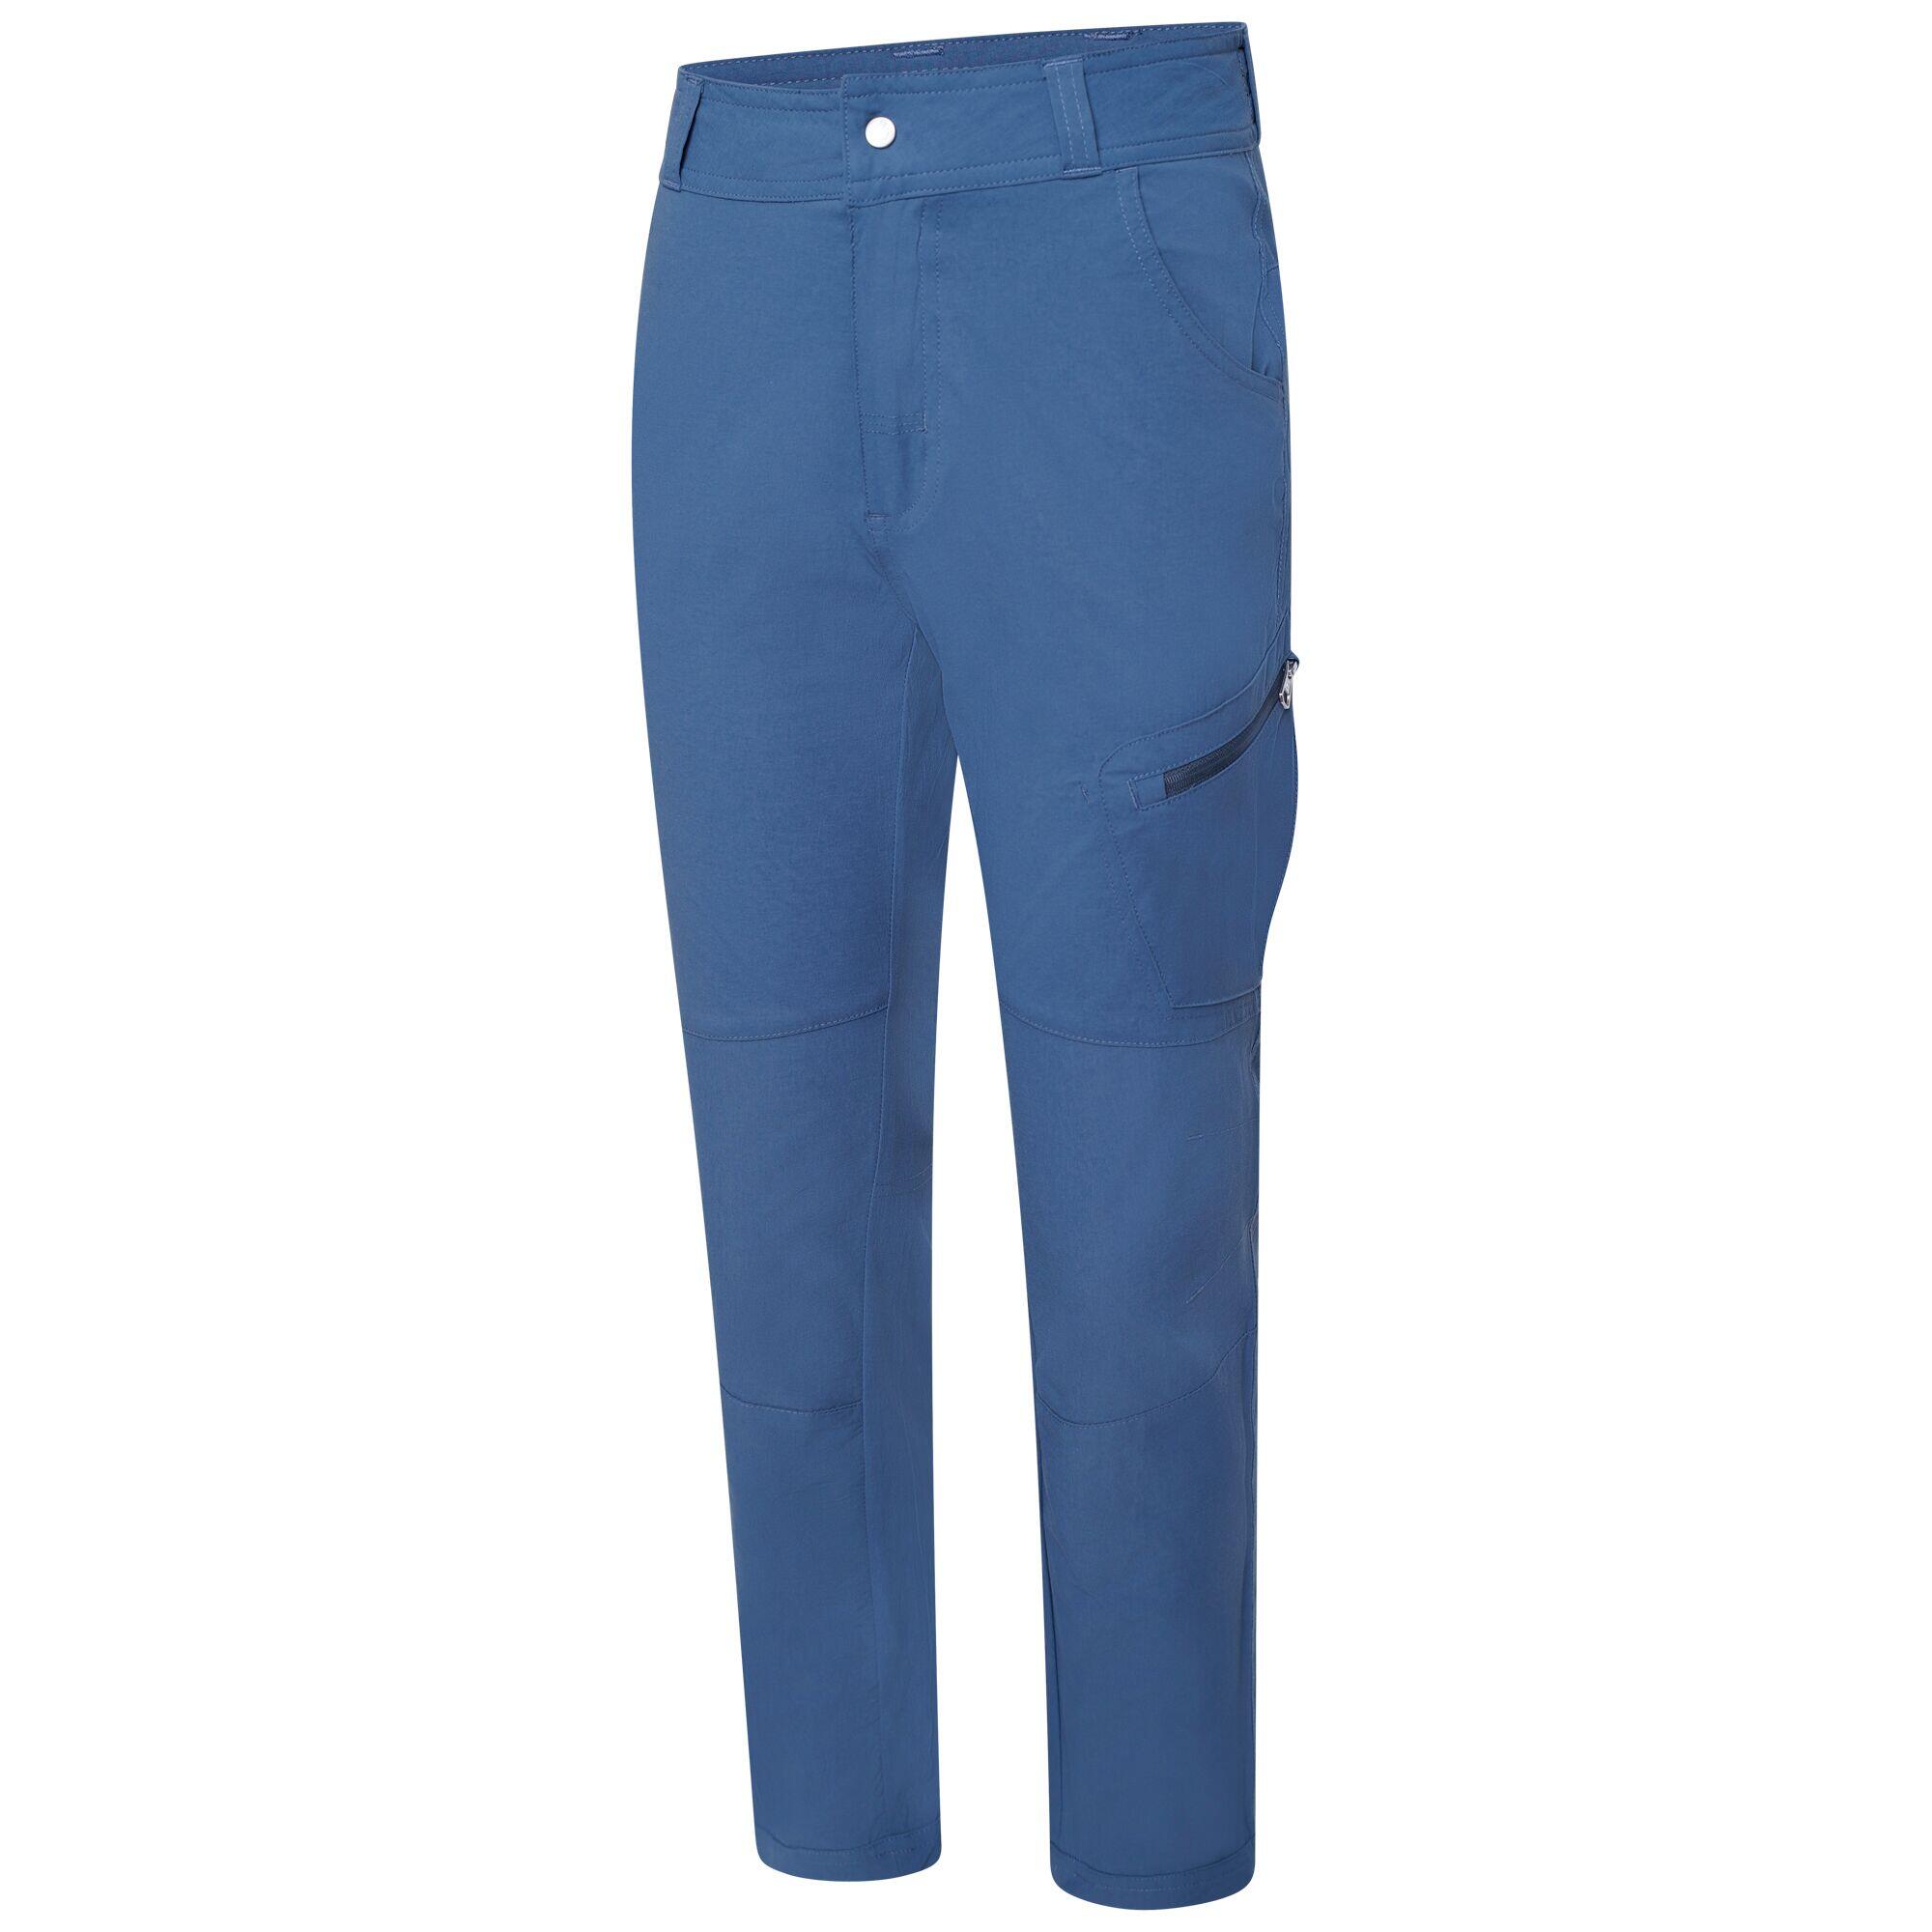 Reprise II Kids Hiking Trousers - Blue Orion Grey 5/5